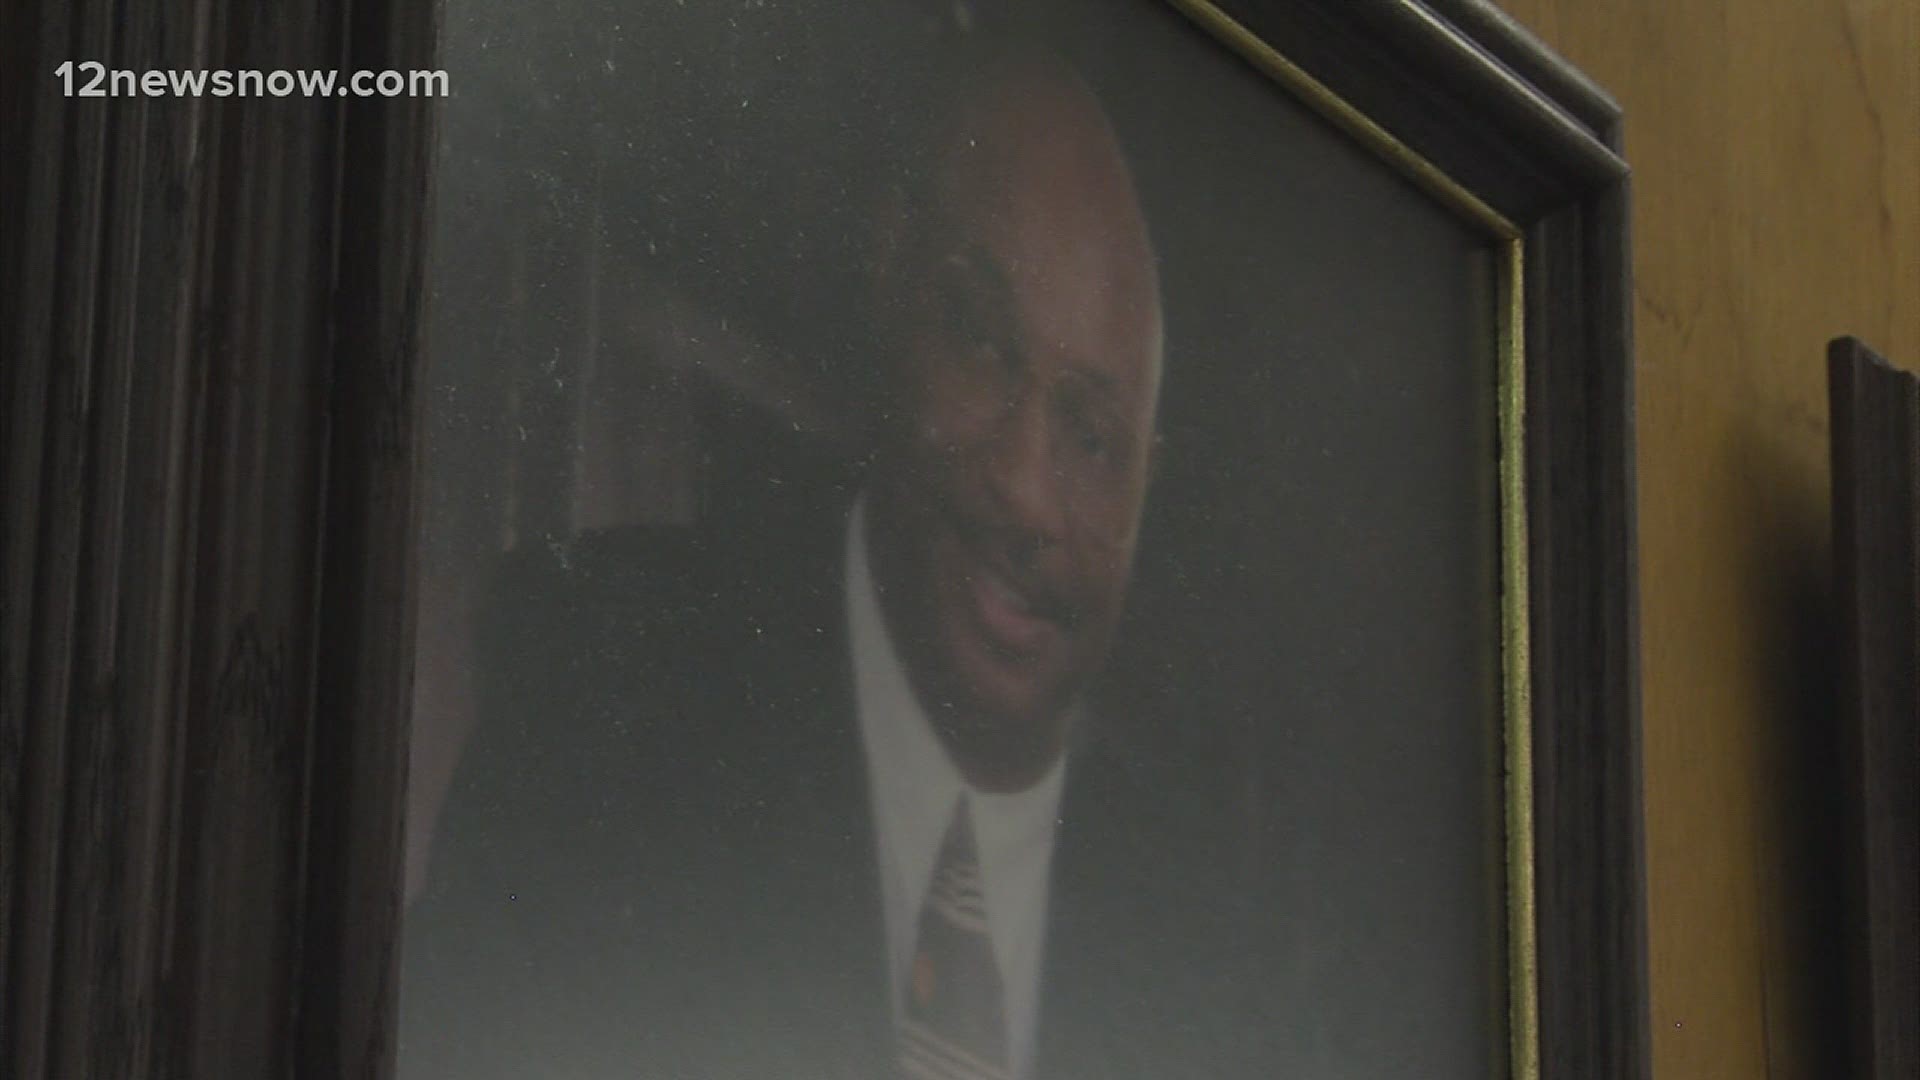 Beaumont ISD's school board will vote Thursday to rename the stadium after former Superintendent Carrol 'Butch' Thomas.